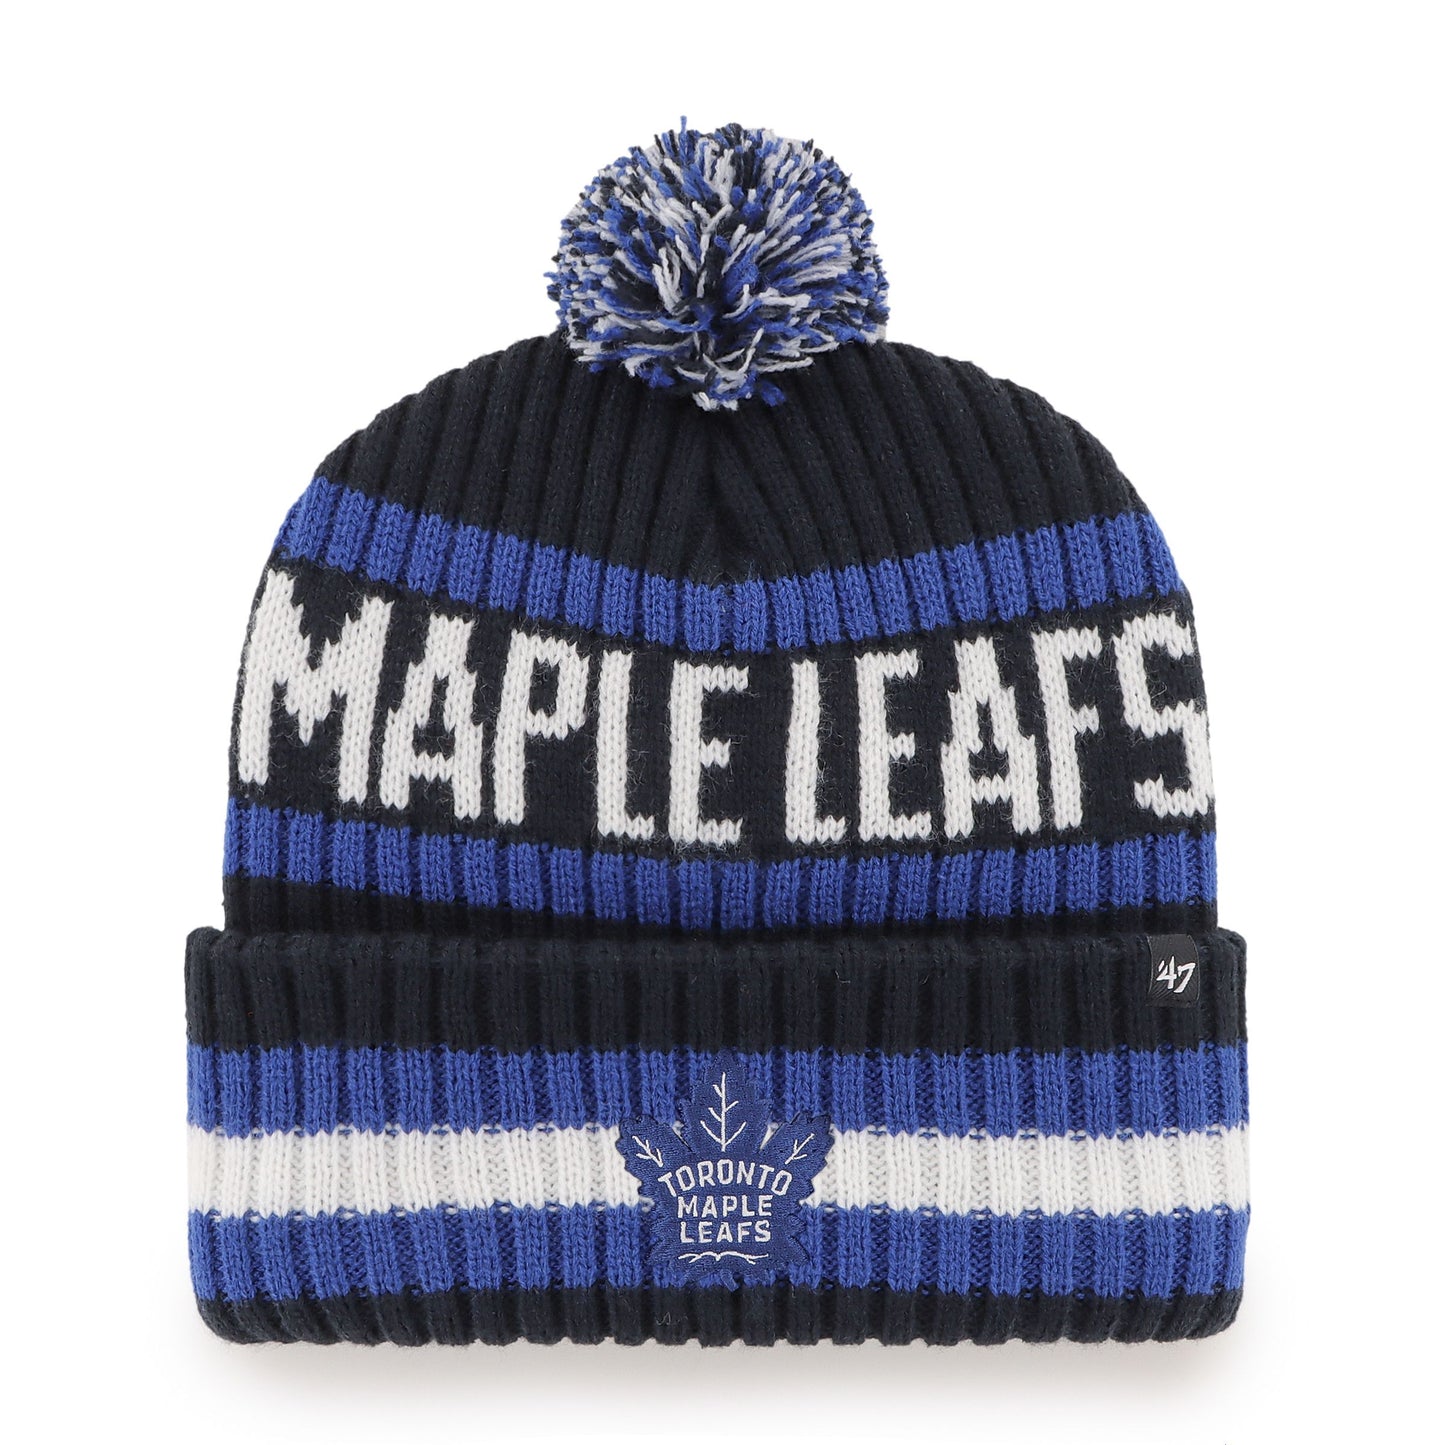 Toronto Maple Leafs - 47 'Bering' Cuff Knit Toque with Pom